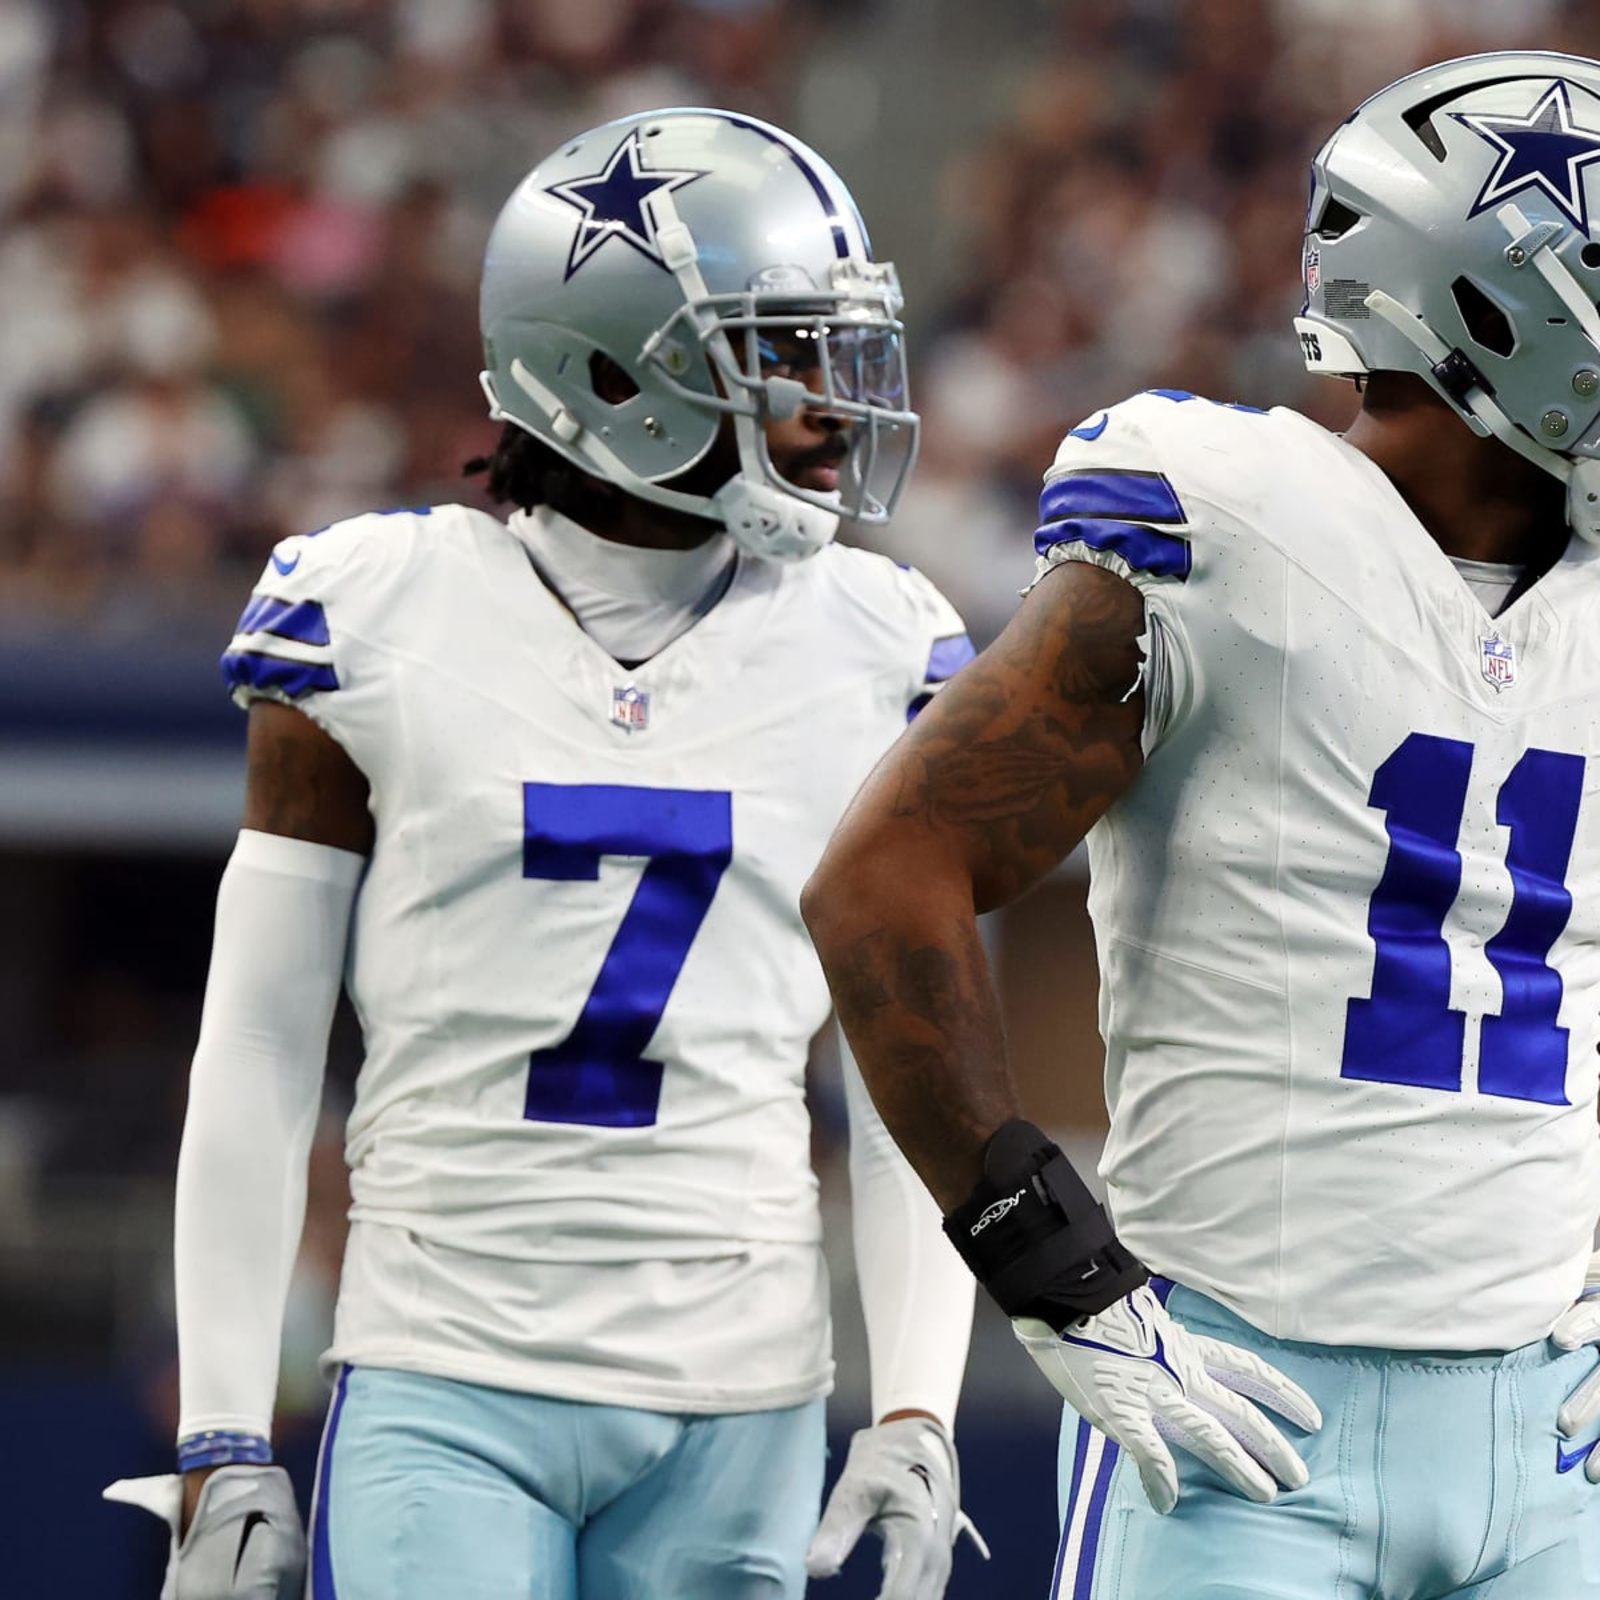 Trevon Diggs injury update: Cowboys CB tore his ACL on Thursday